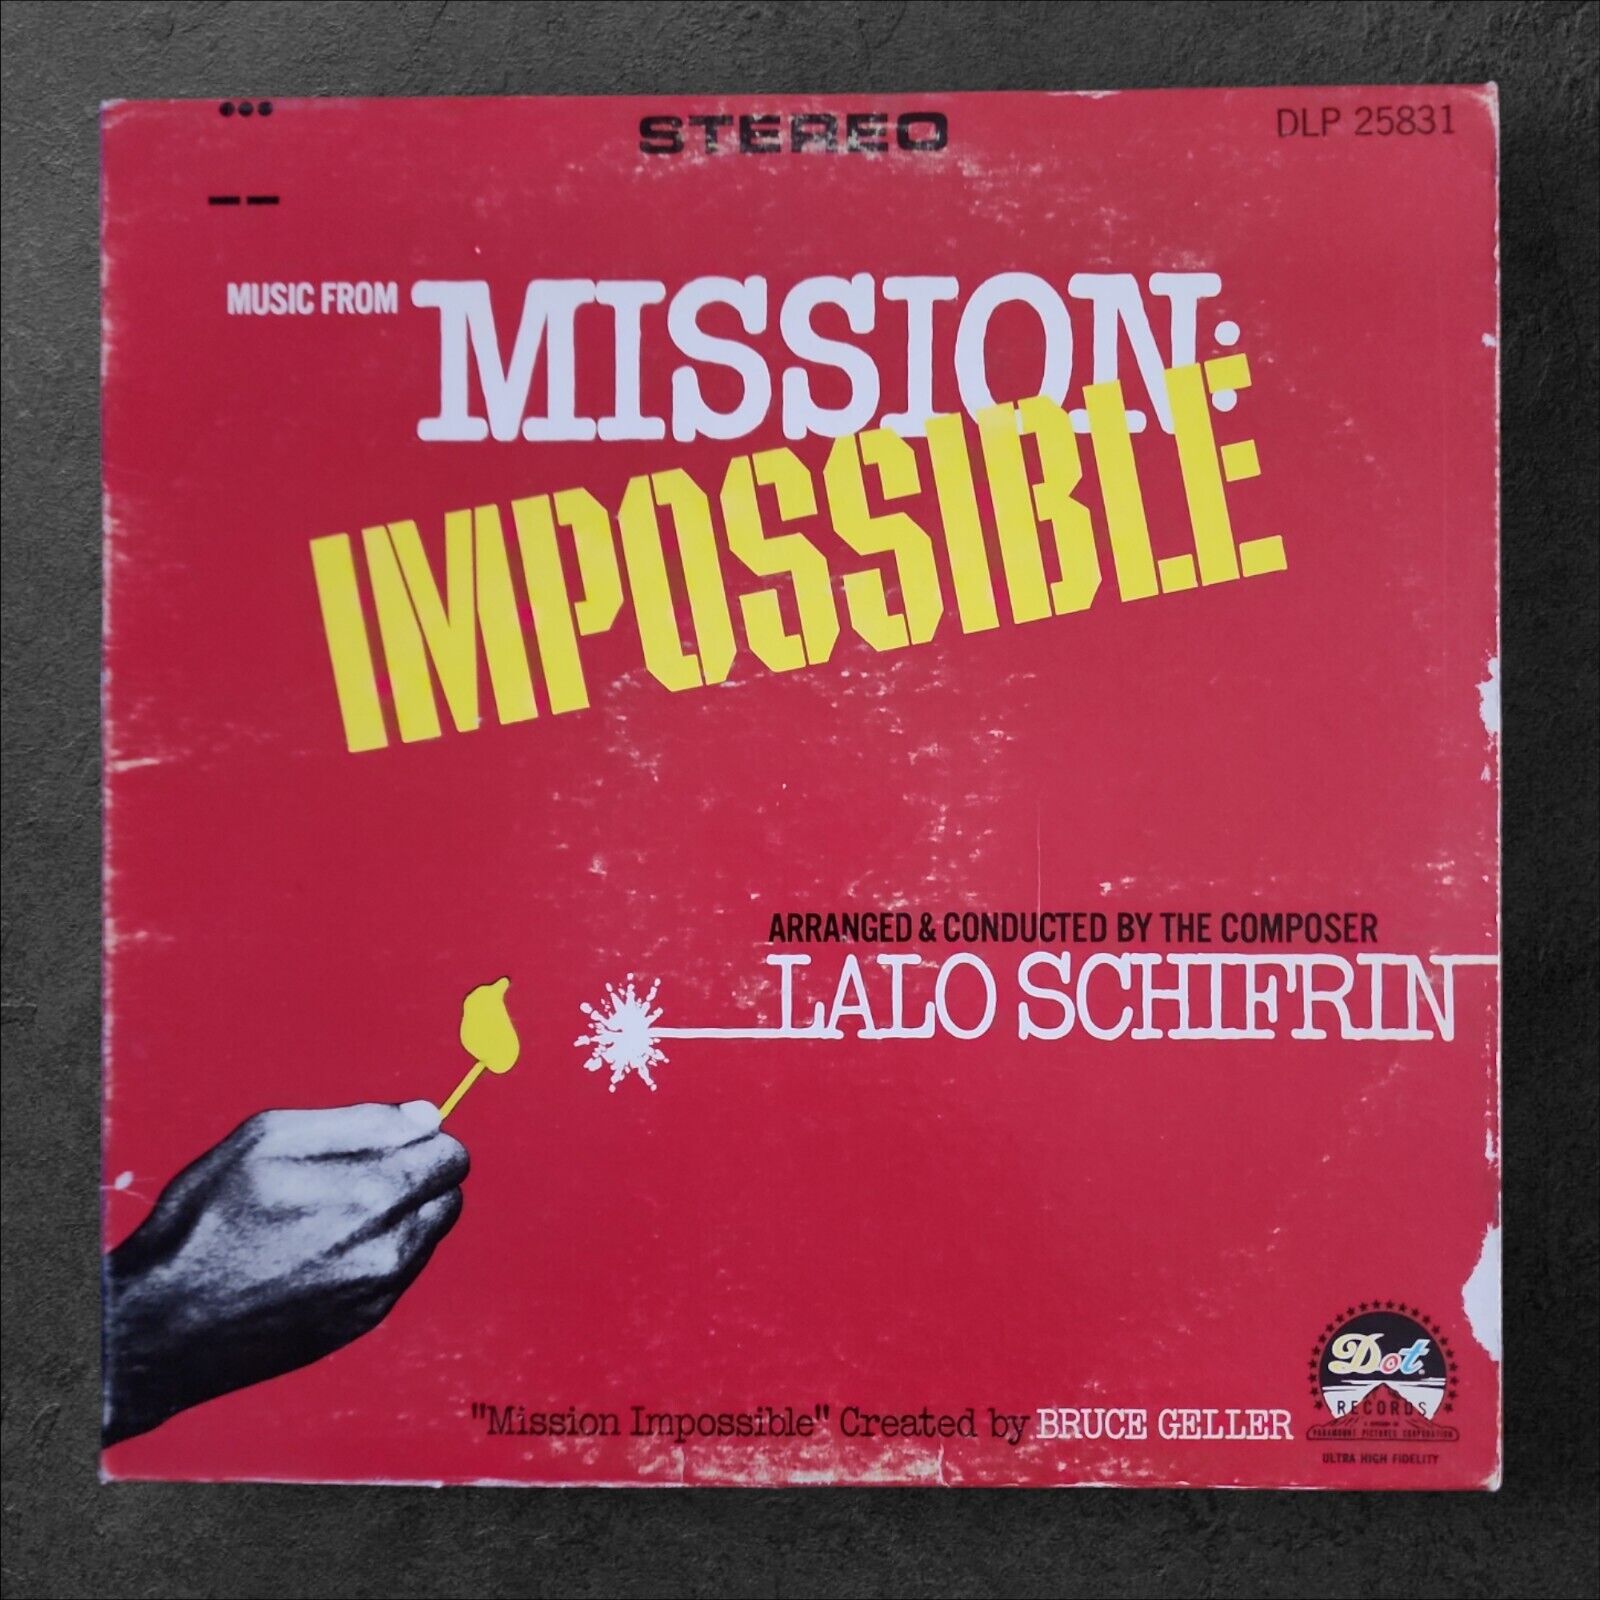 1967 Dot Records Music From Mission Impossible Vinyl LP ~ DLP 25831